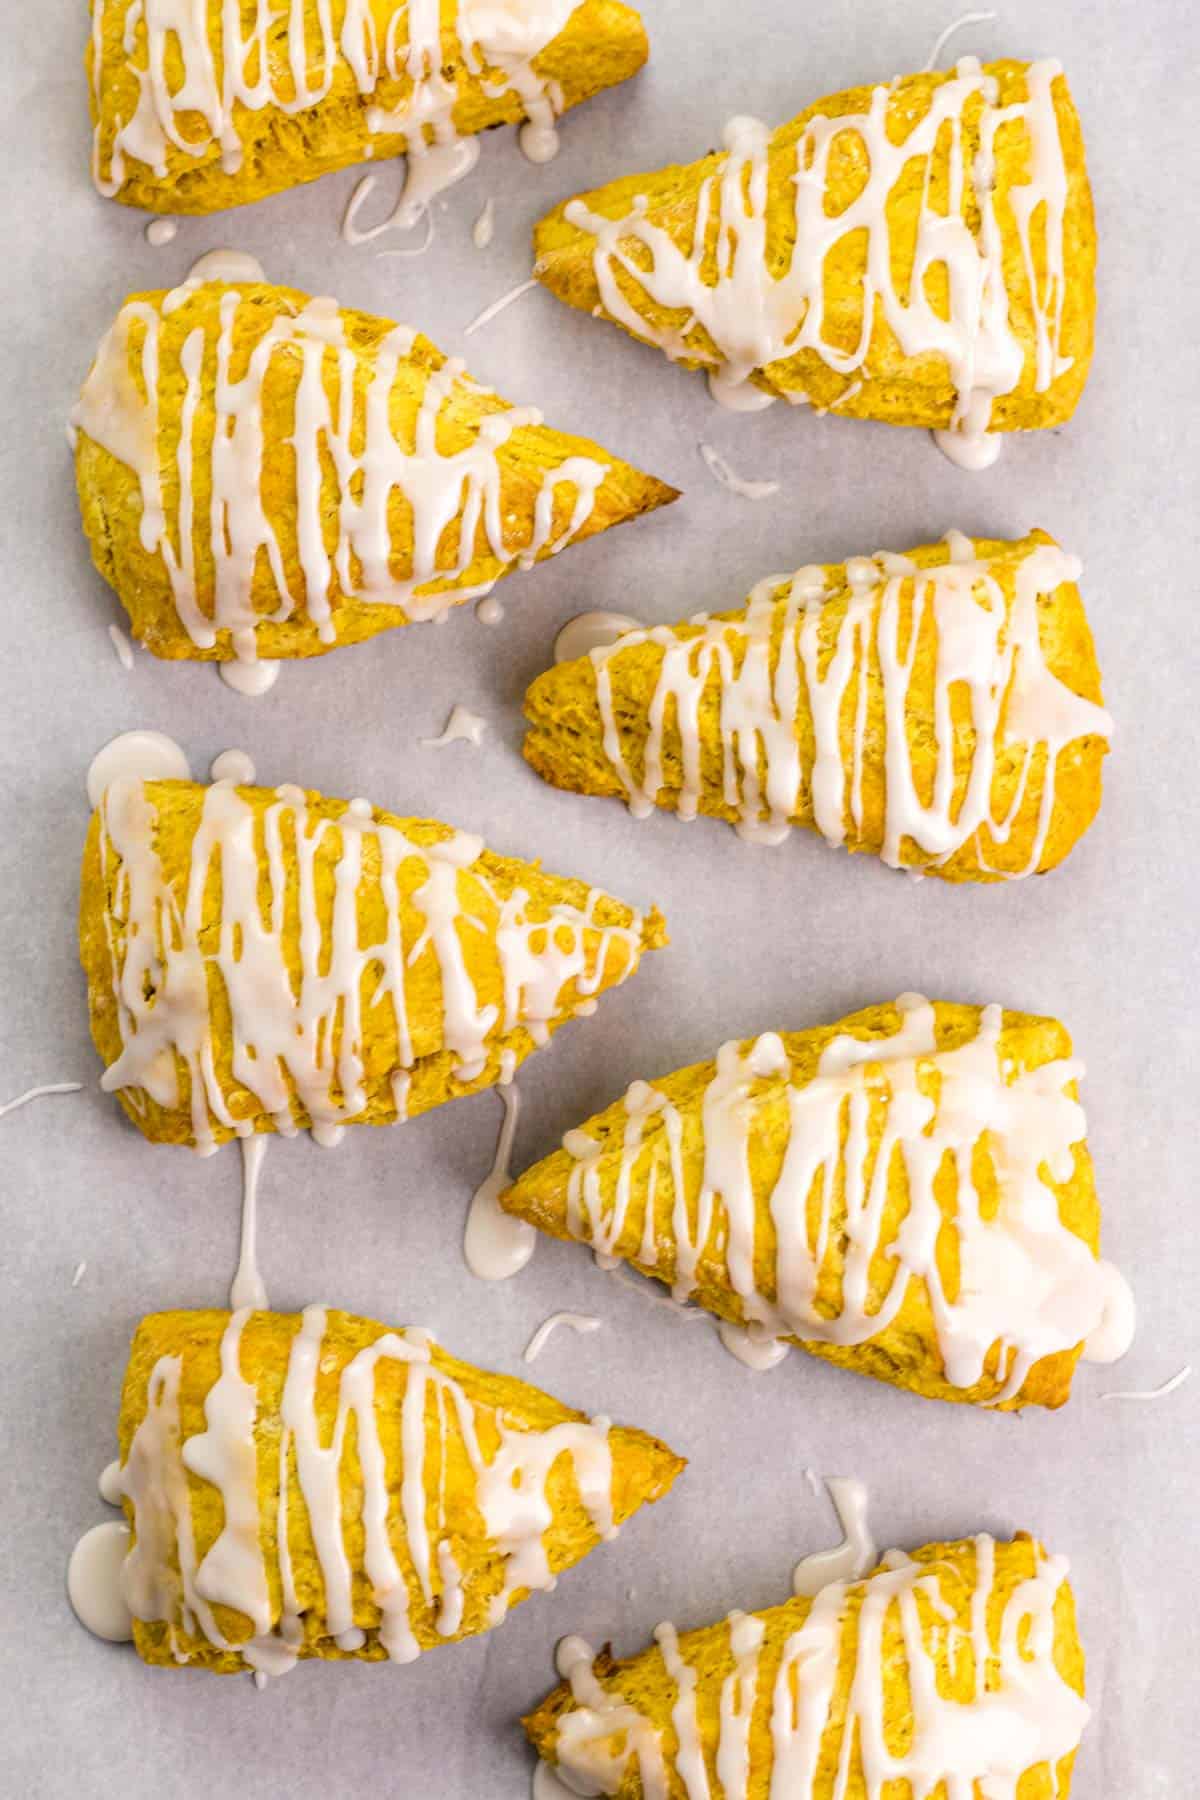 8 pumpkin scones after the frosting has been drizzled on top.